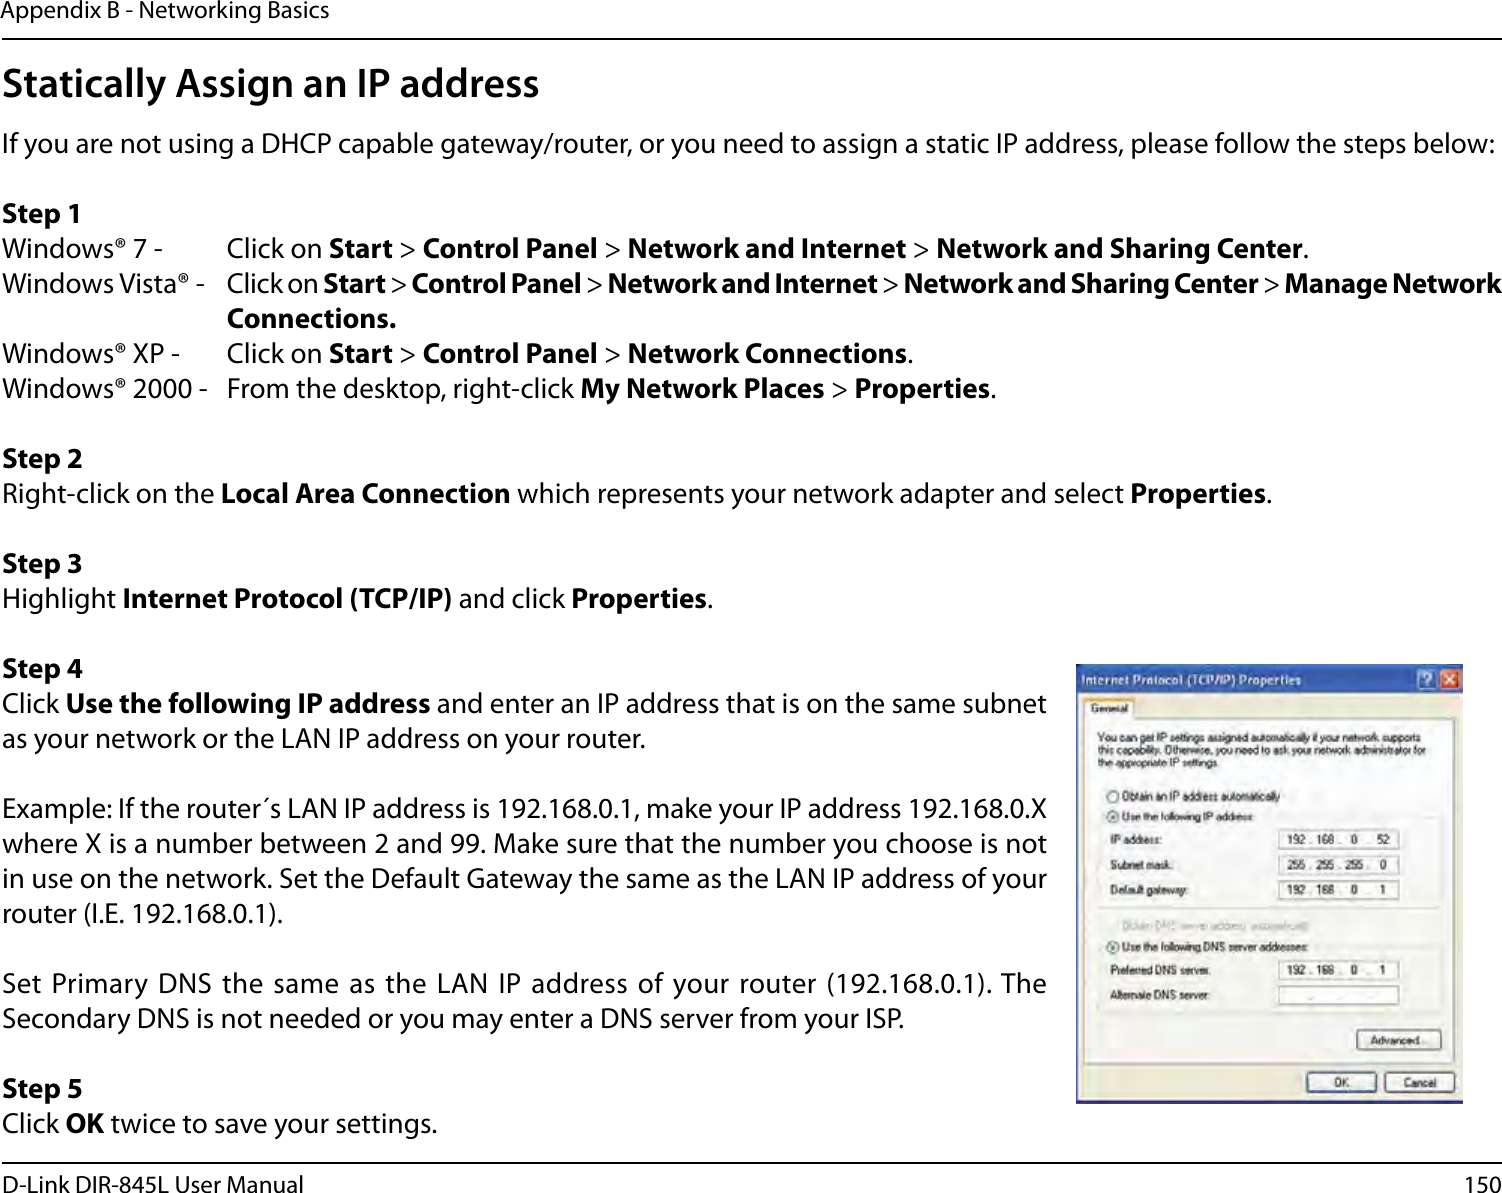 150D-Link DIR-845L User ManualAppendix B - Networking BasicsStatically Assign an IP addressIf you are not using a DHCP capable gateway/router, or you need to assign a static IP address, please follow the steps below:Step 1Windows® 7 -  Click on Start &gt; Control Panel &gt; Network and Internet &gt; Network and Sharing Center.Windows Vista® -  Click on Start &gt; Control Panel &gt; Network and Internet &gt; Network and Sharing Center &gt; Manage Network      Connections.Windows® XP -  Click on Start &gt; Control Panel &gt; Network Connections.Windows® 2000 -  From the desktop, right-click My Network Places &gt; Properties.Step 2Right-click on the Local Area Connection which represents your network adapter and select Properties.Step 3Highlight Internet Protocol (TCP/IP) and click Properties.Step 4Click Use the following IP address and enter an IP address that is on the same subnet as your network or the LAN IP address on your router. Example: If the router´s LAN IP address is 192.168.0.1, make your IP address 192.168.0.X where X is a number between 2 and 99. Make sure that the number you choose is not in use on the network. Set the Default Gateway the same as the LAN IP address of your router (I.E. 192.168.0.1). Set Primary DNS  the same as  the LAN IP  address of your router (192.168.0.1). The Secondary DNS is not needed or you may enter a DNS server from your ISP.Step 5Click OK twice to save your settings.